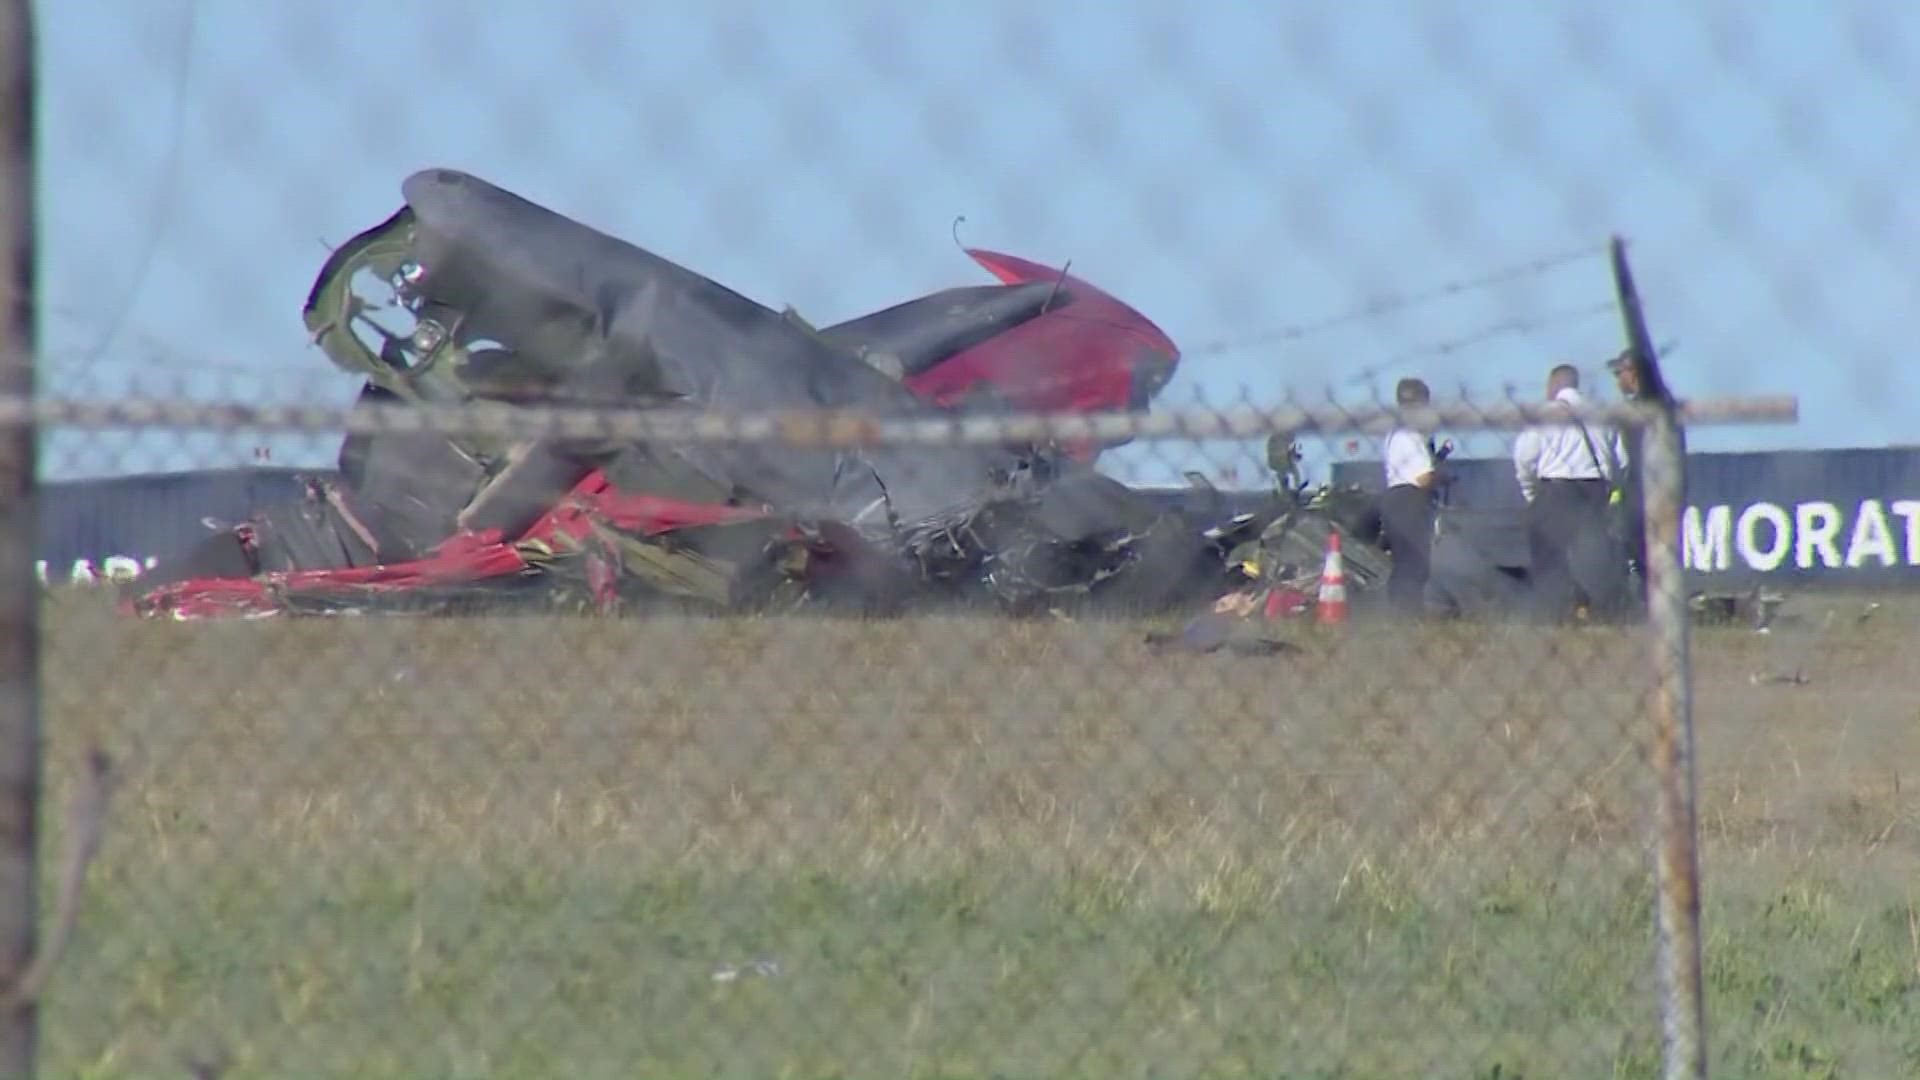 The victims of the crash include two retired pilots. The NTSB has begun its investigation into the crash.